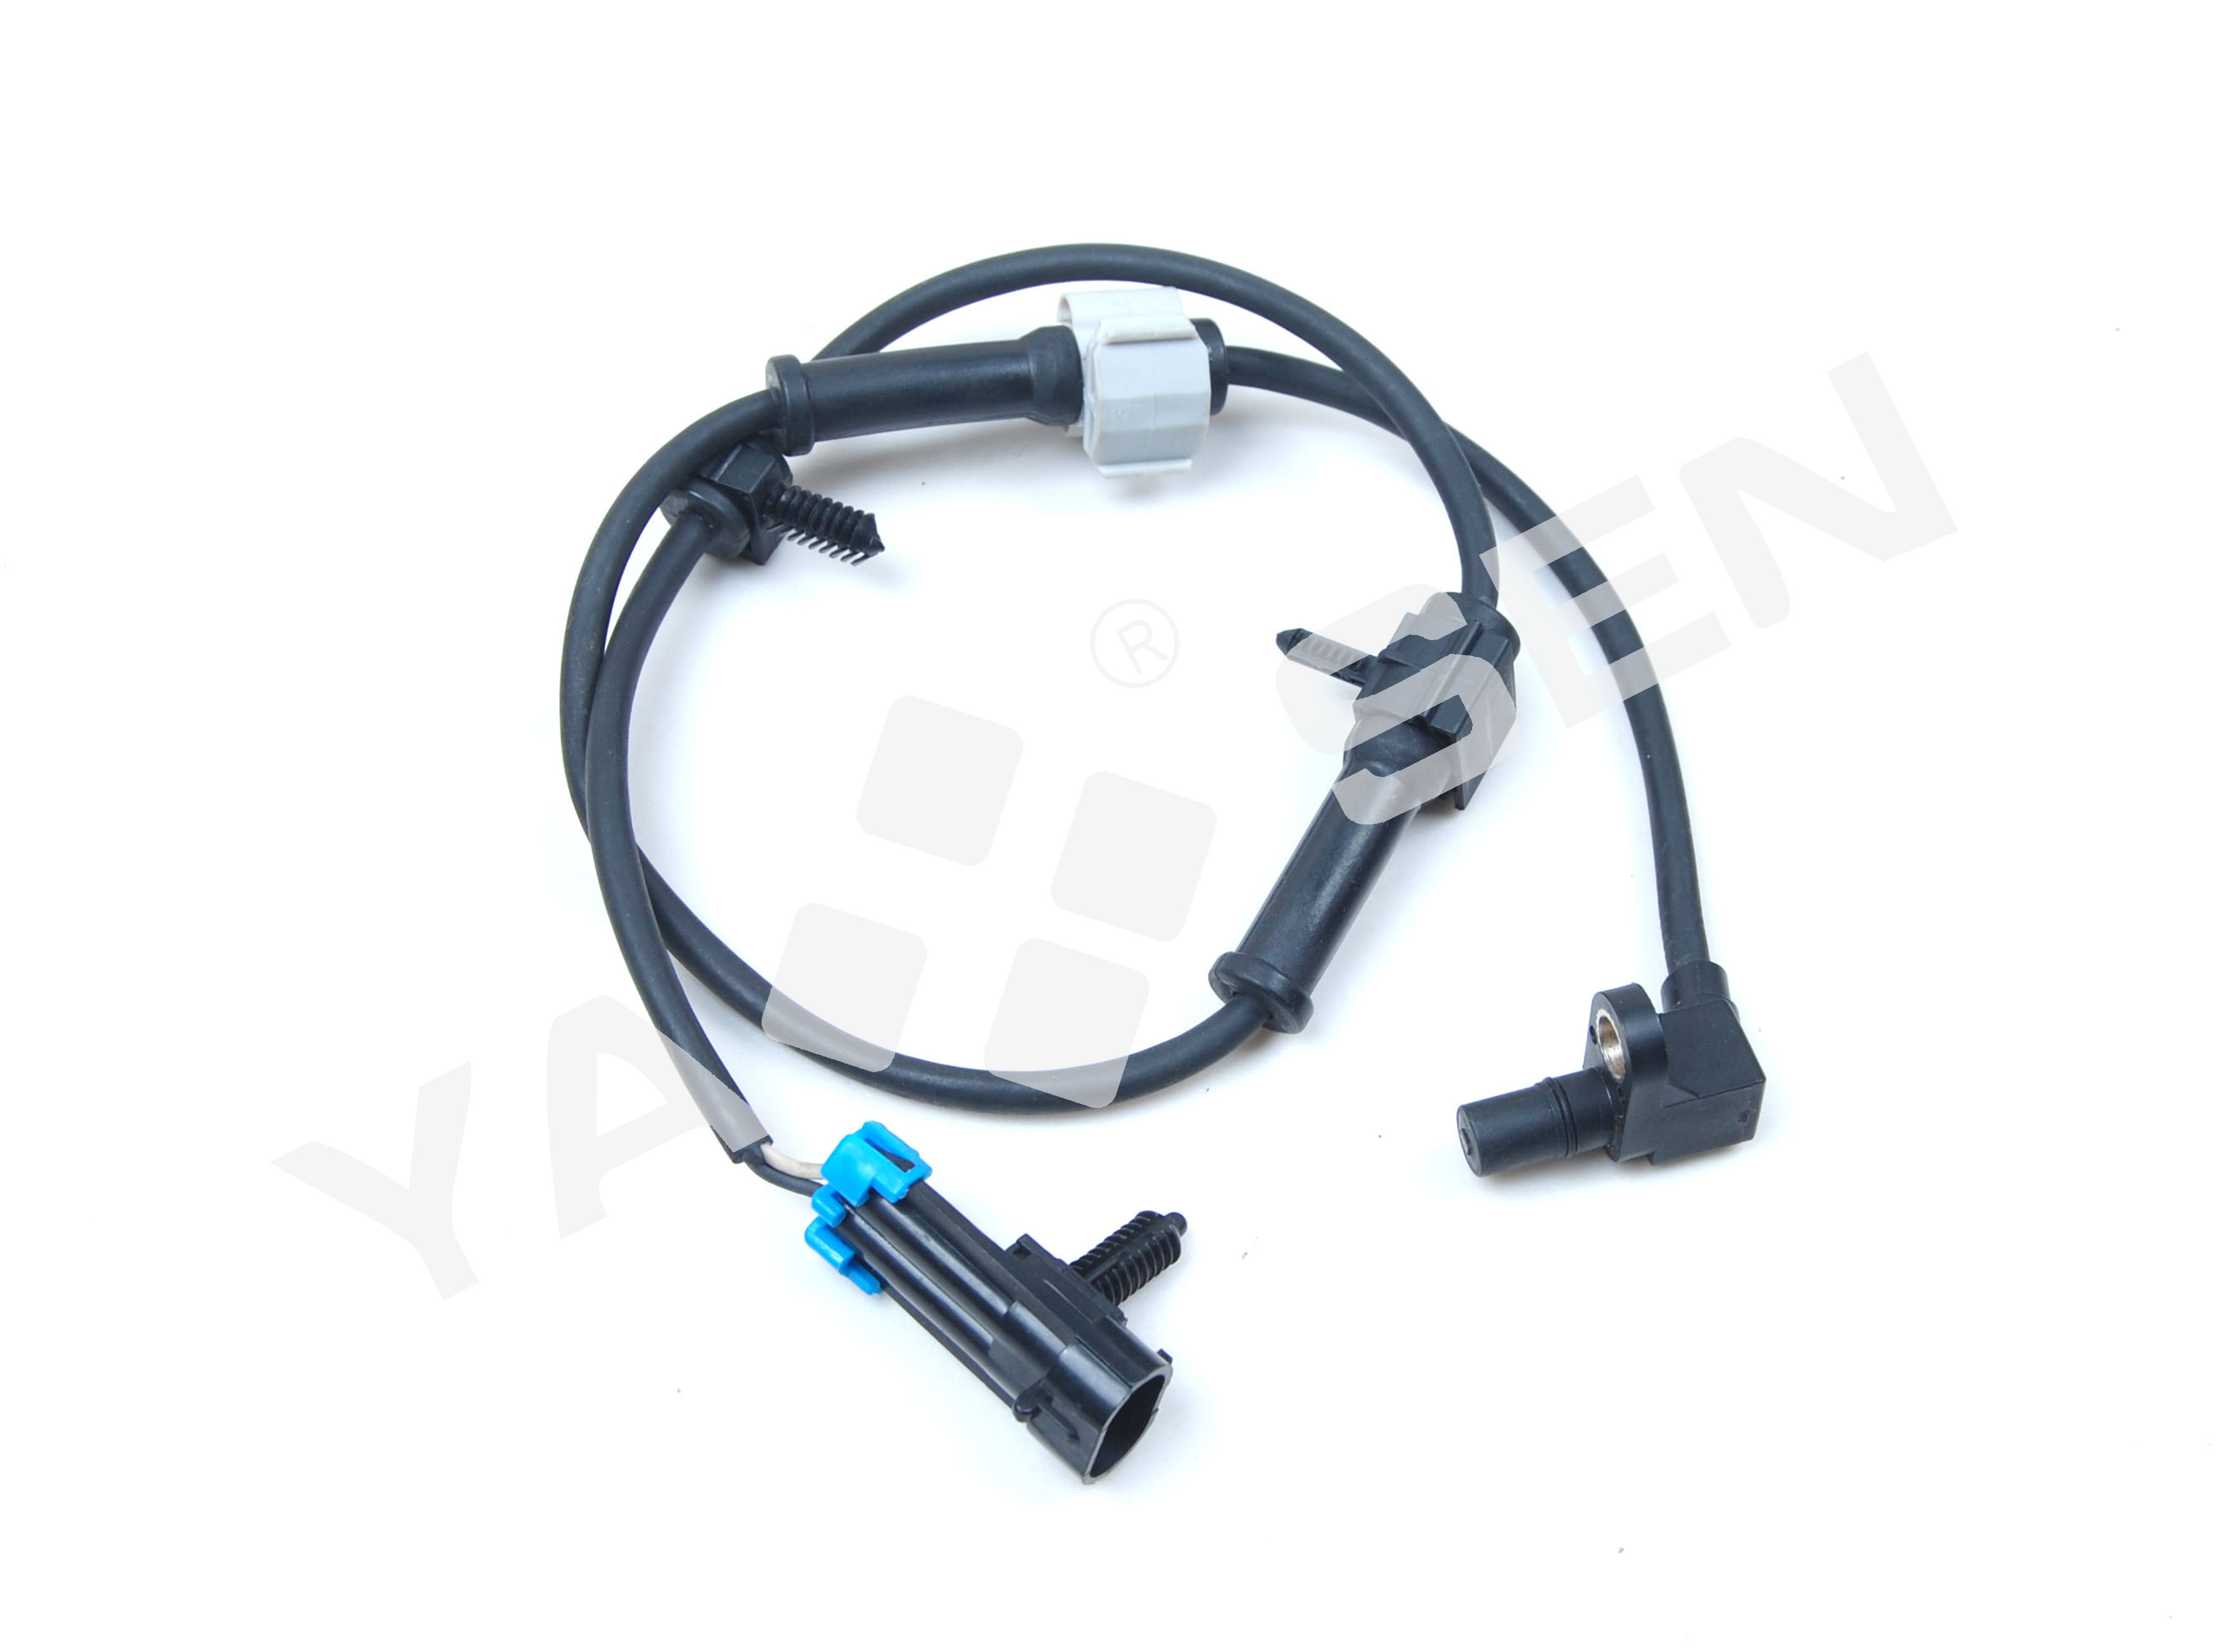 ABS Wheel Speed Sensor for FORD/OPEL,  SU8012 5S6502 ALS17 AB1536  4882673 4882673AB